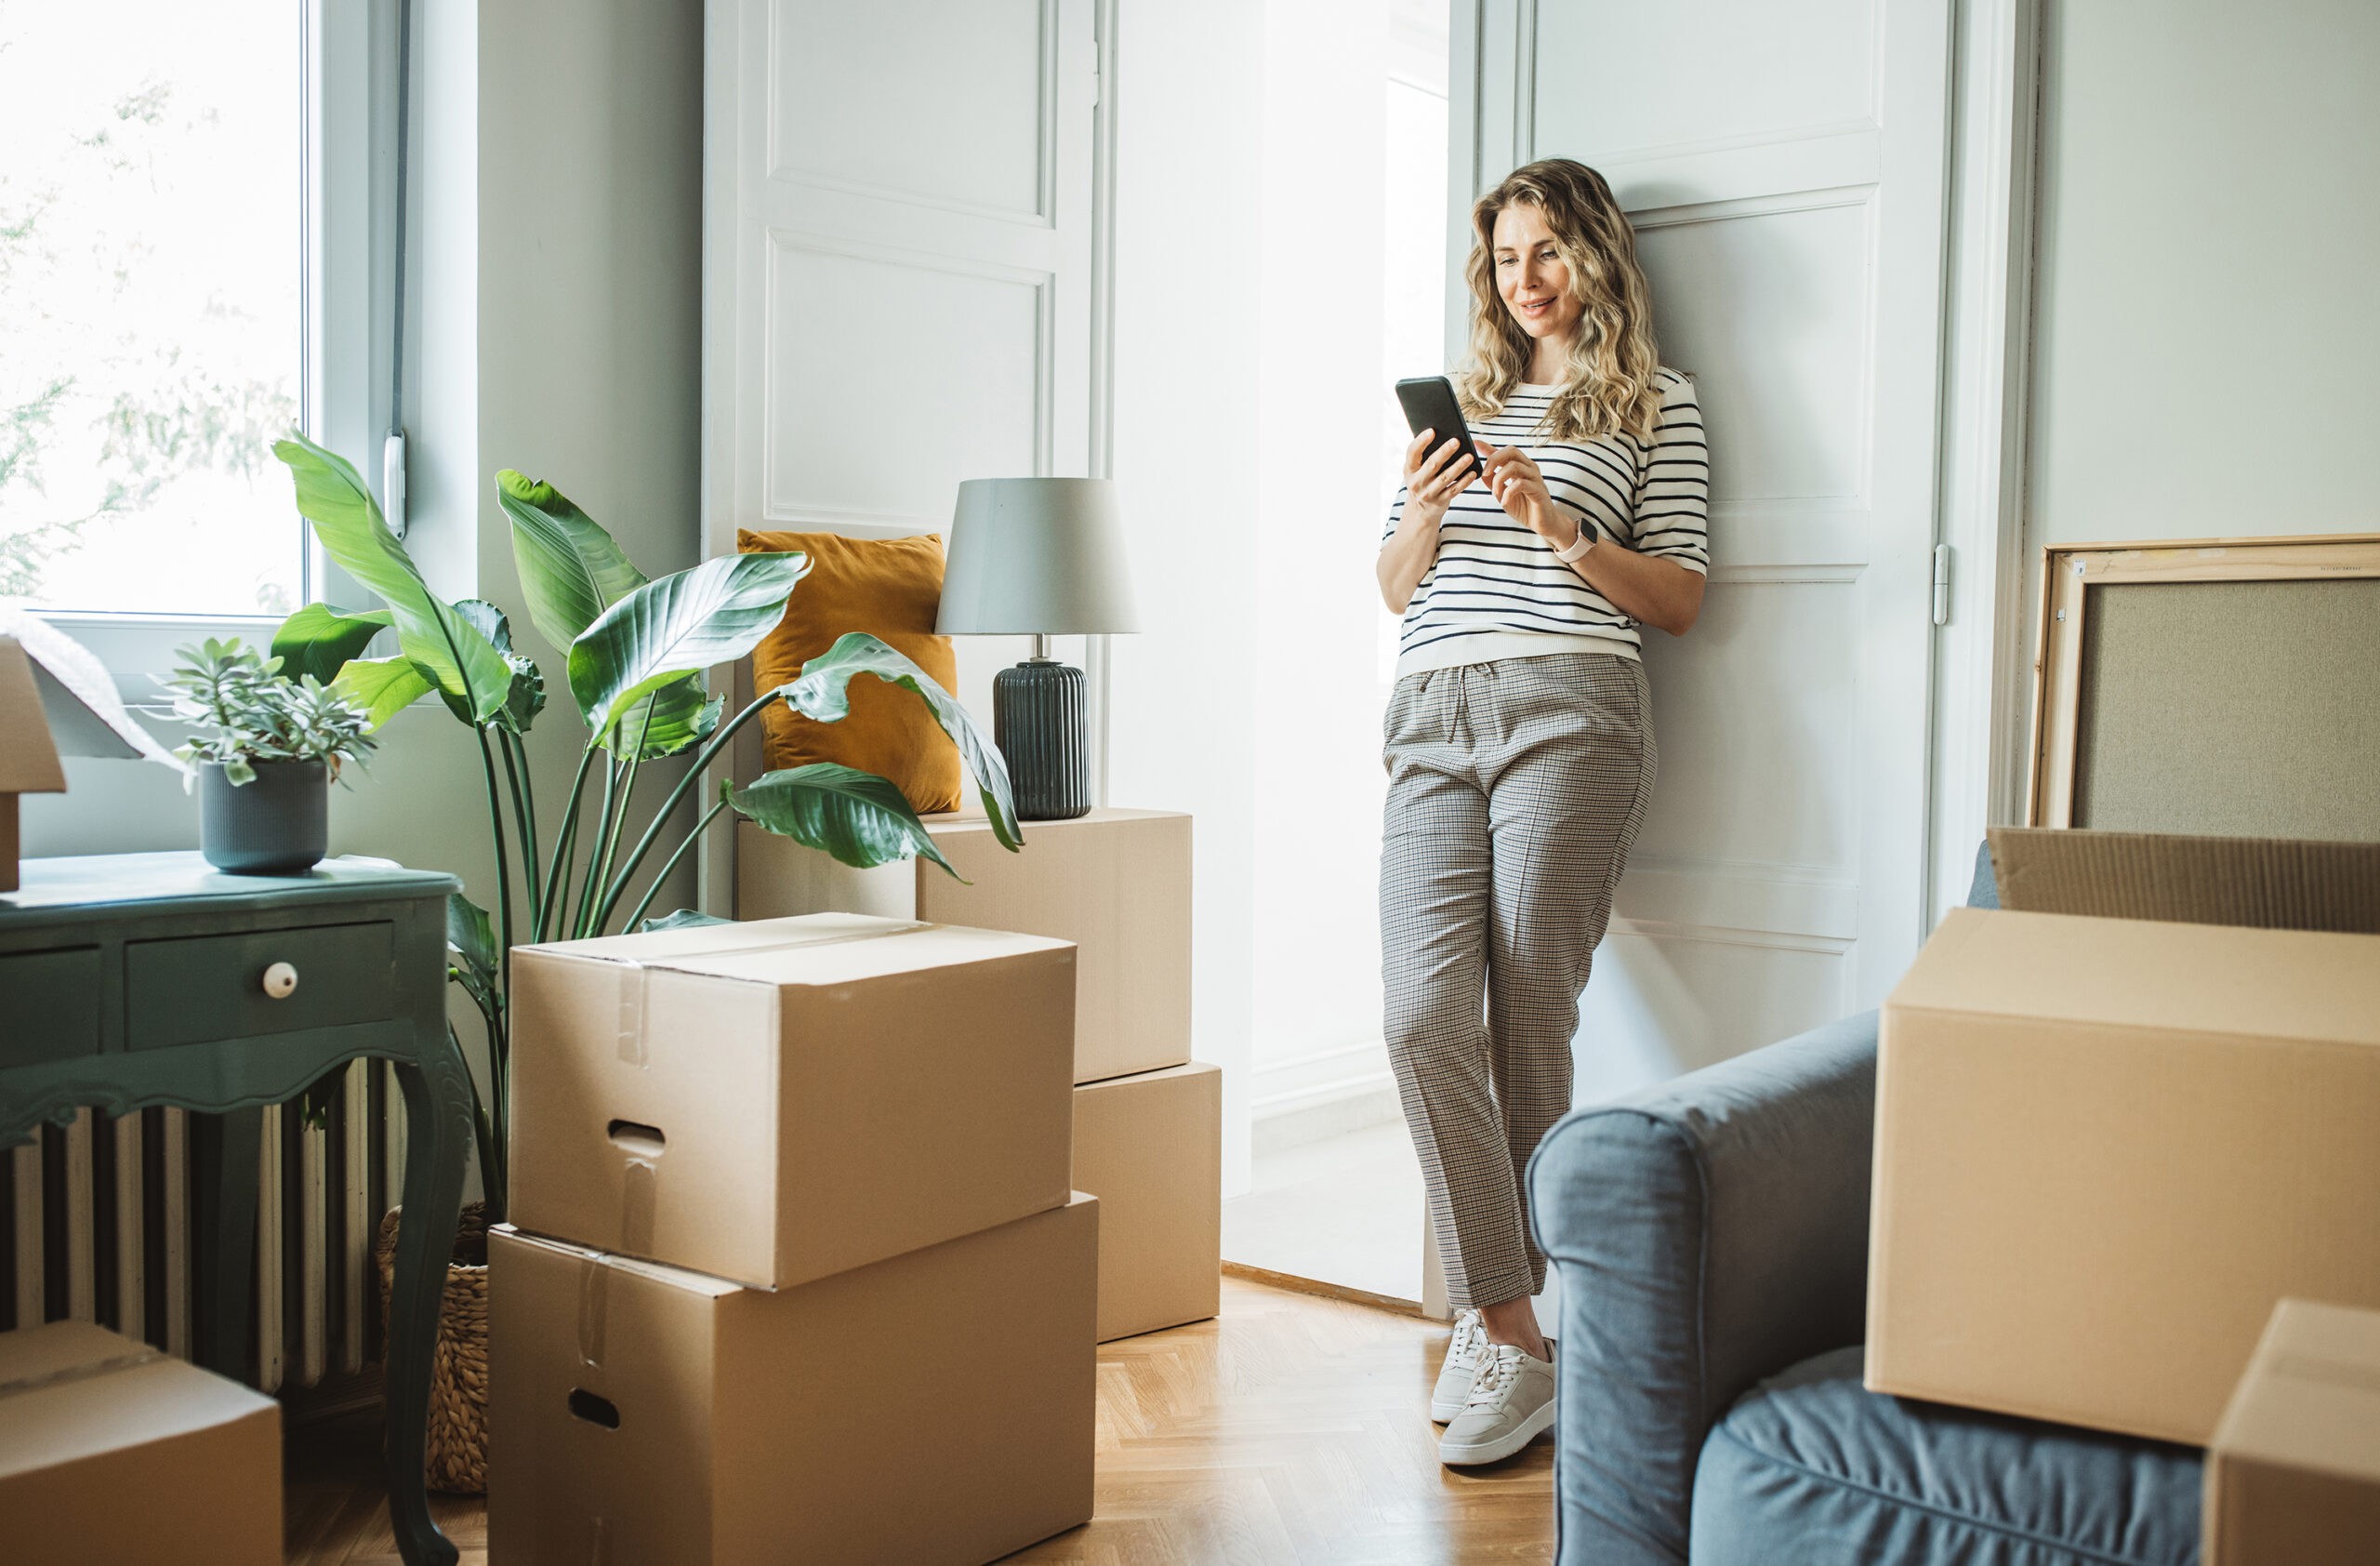 Mature woman with Moving Boxes in New Home